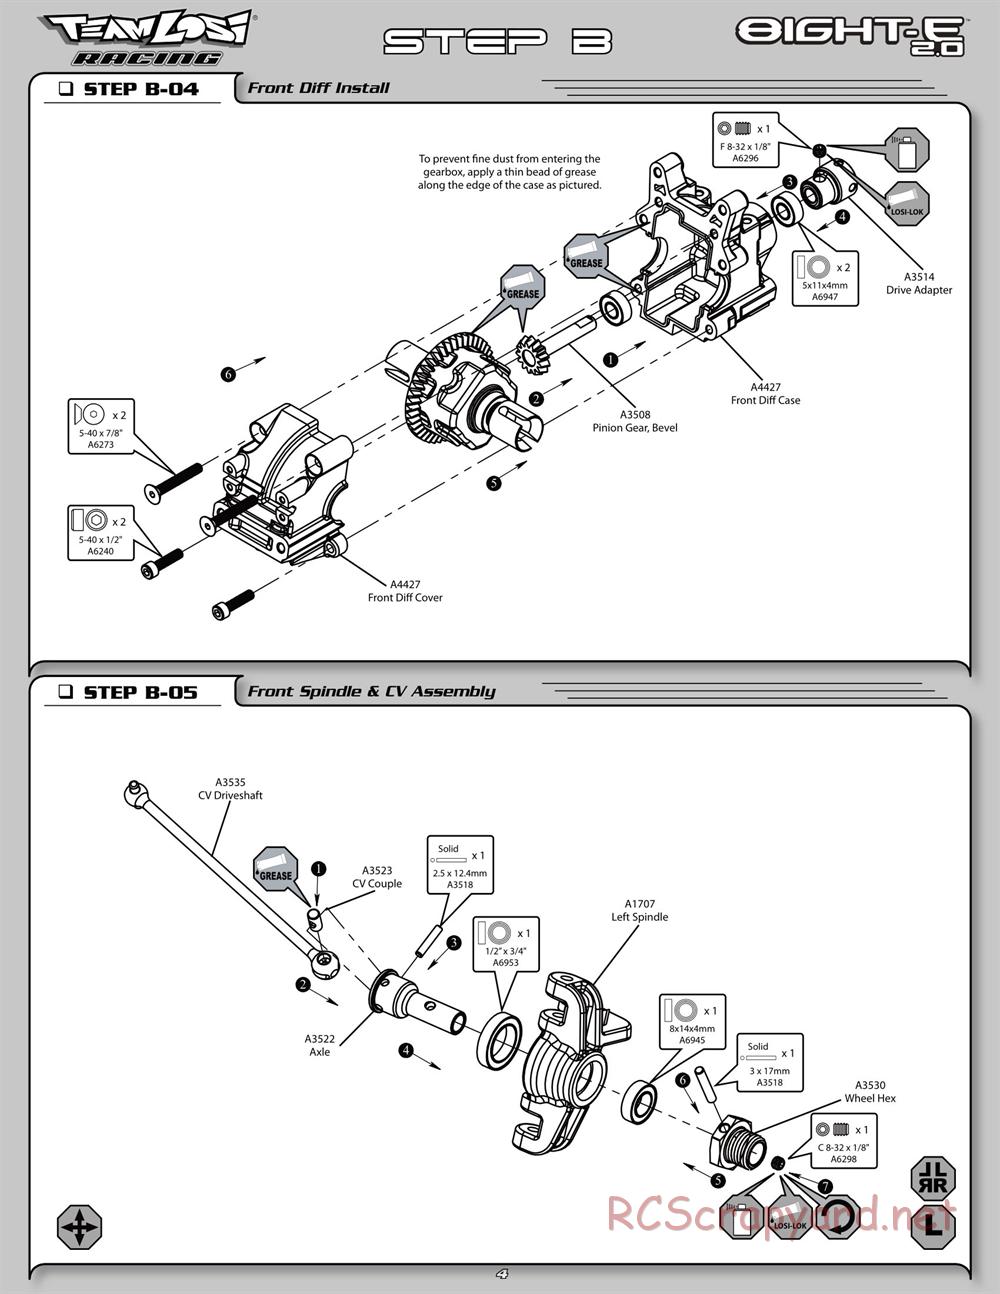 Team Losi - 8ight-E 2.0 Race Roller - Manual - Page 11